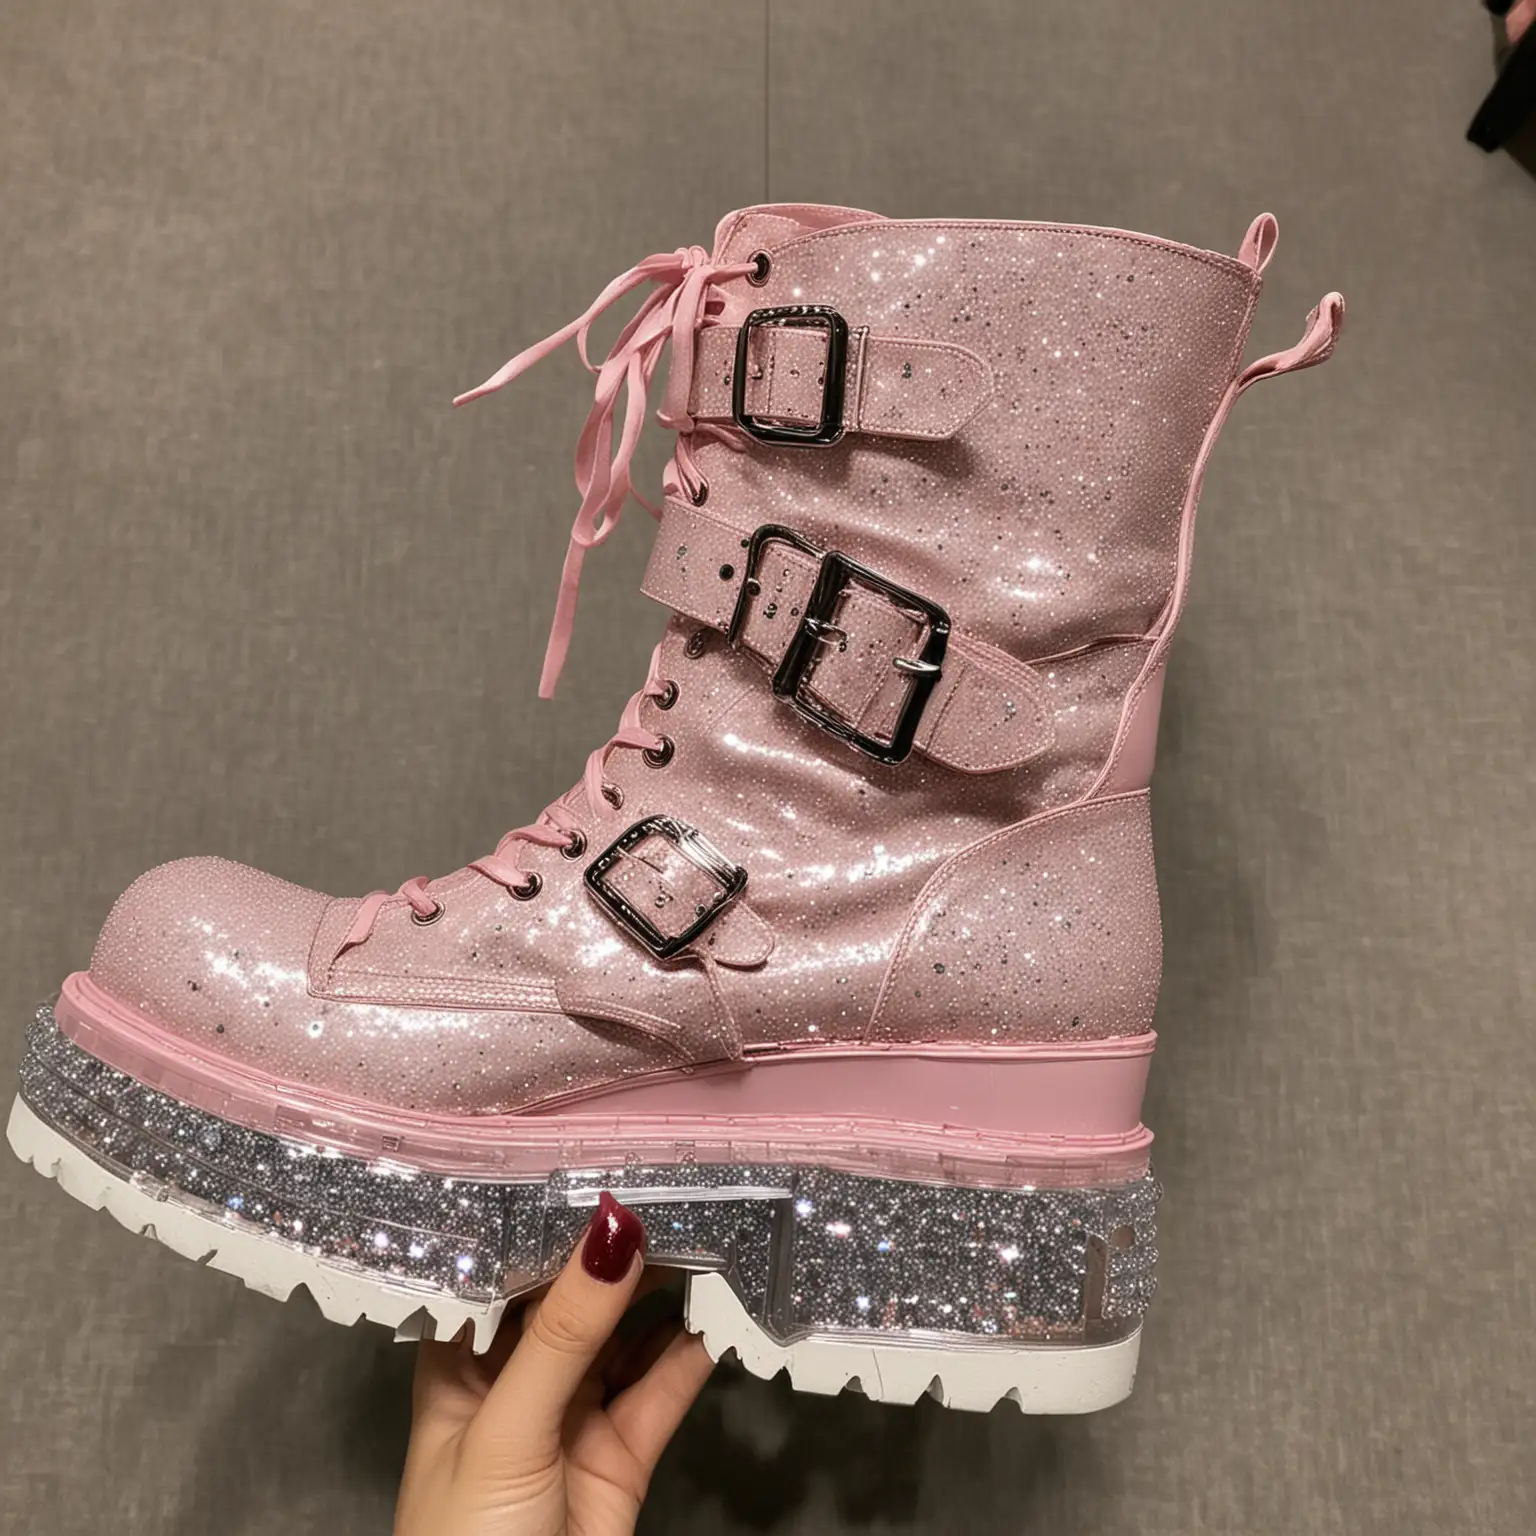 Comfy Sparkly Buckle Rave Platform Boots Neon Glows and Dancing Vibes